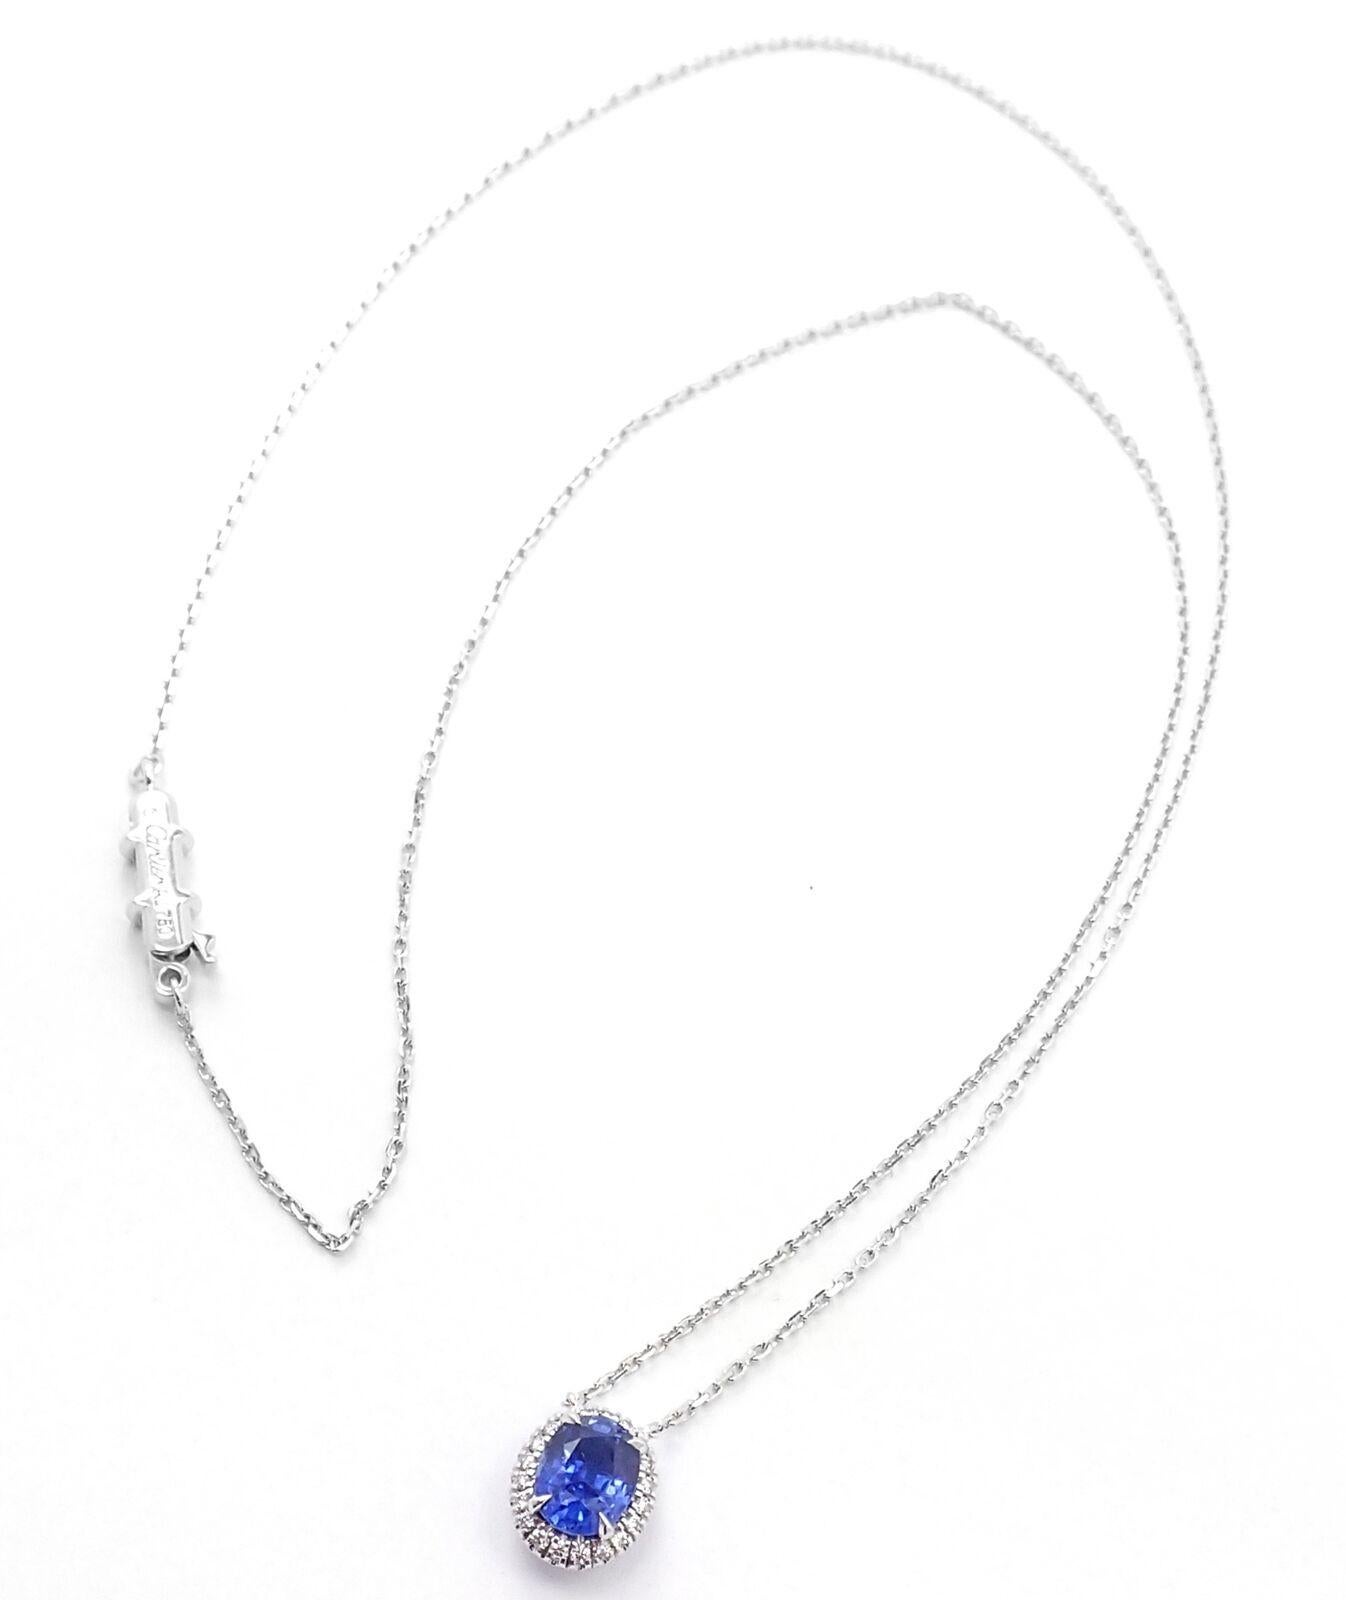 18k White Gold Diamond & Sapphire Pendant Necklace by Cartier. 
With 1 oval shape sapphire 7mm x 6mm approximately 1.5ct
20 round brilliant cut diamonds VS1 clarity, E color total weight approximately .10ct
Details: 
Chain Length: 16.25